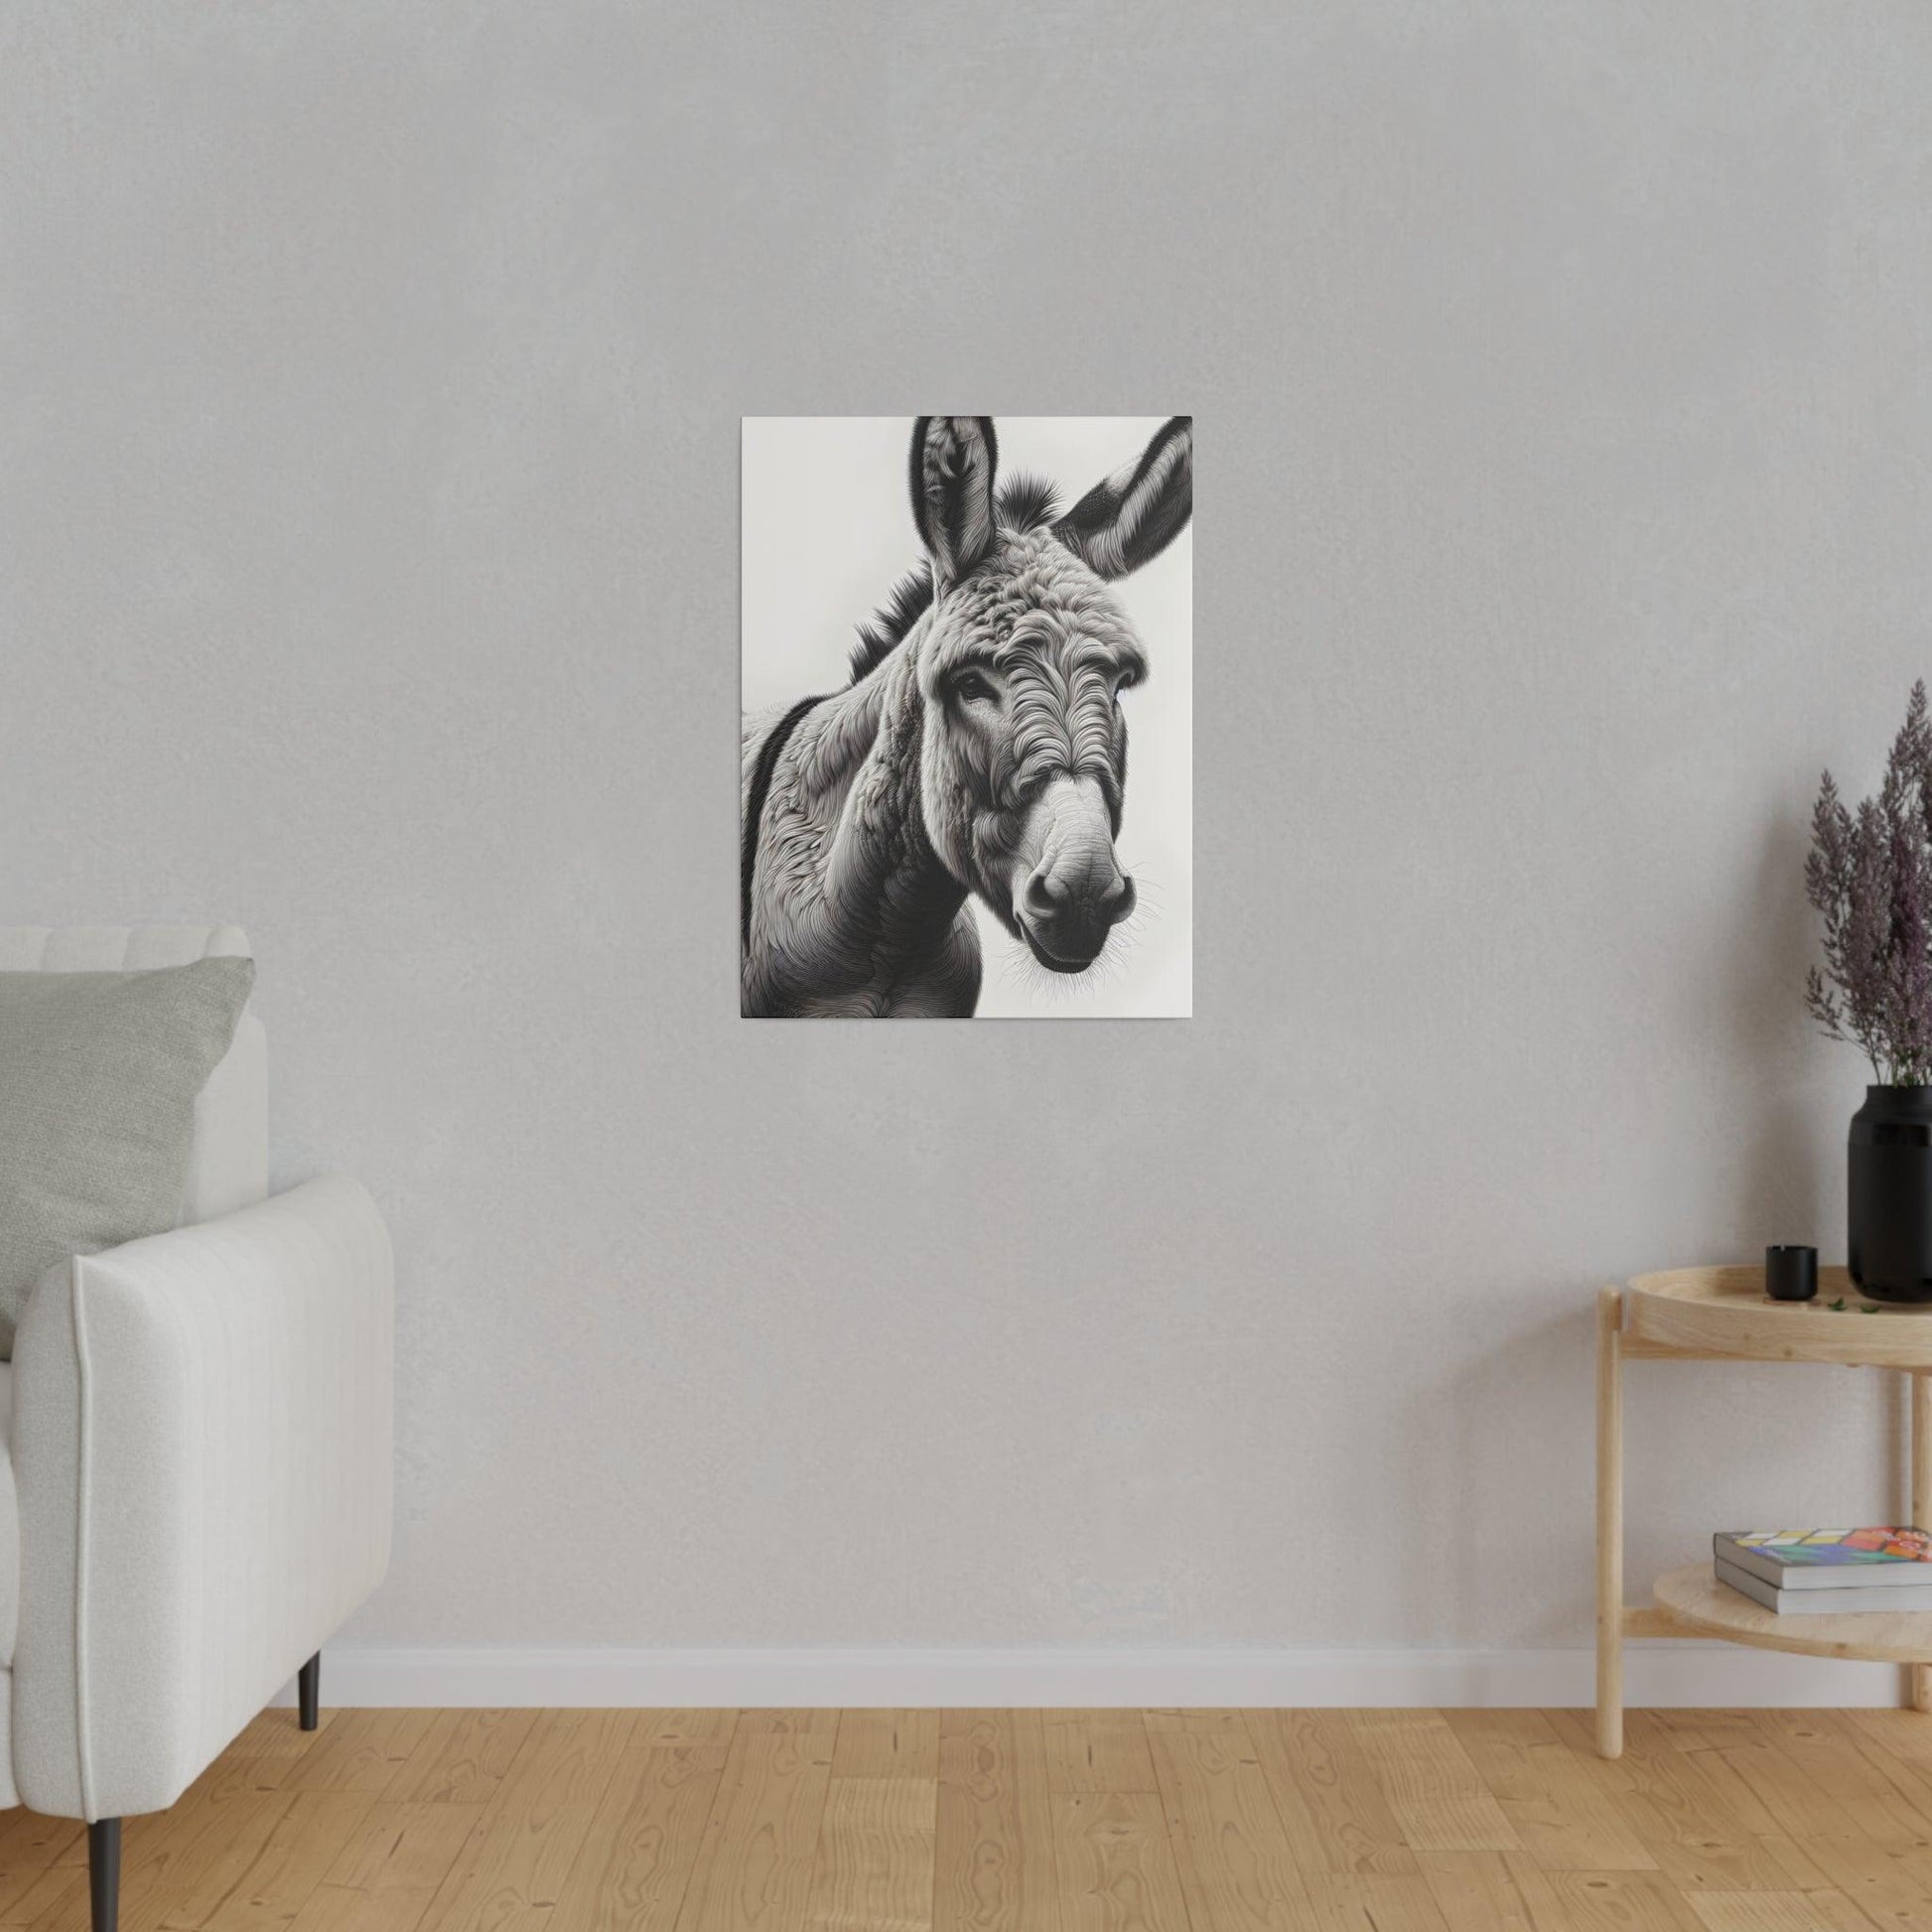 "Whimsical Wonder: The Donkey-inspired Canvas Wall Art Collection" - The Alice Gallery